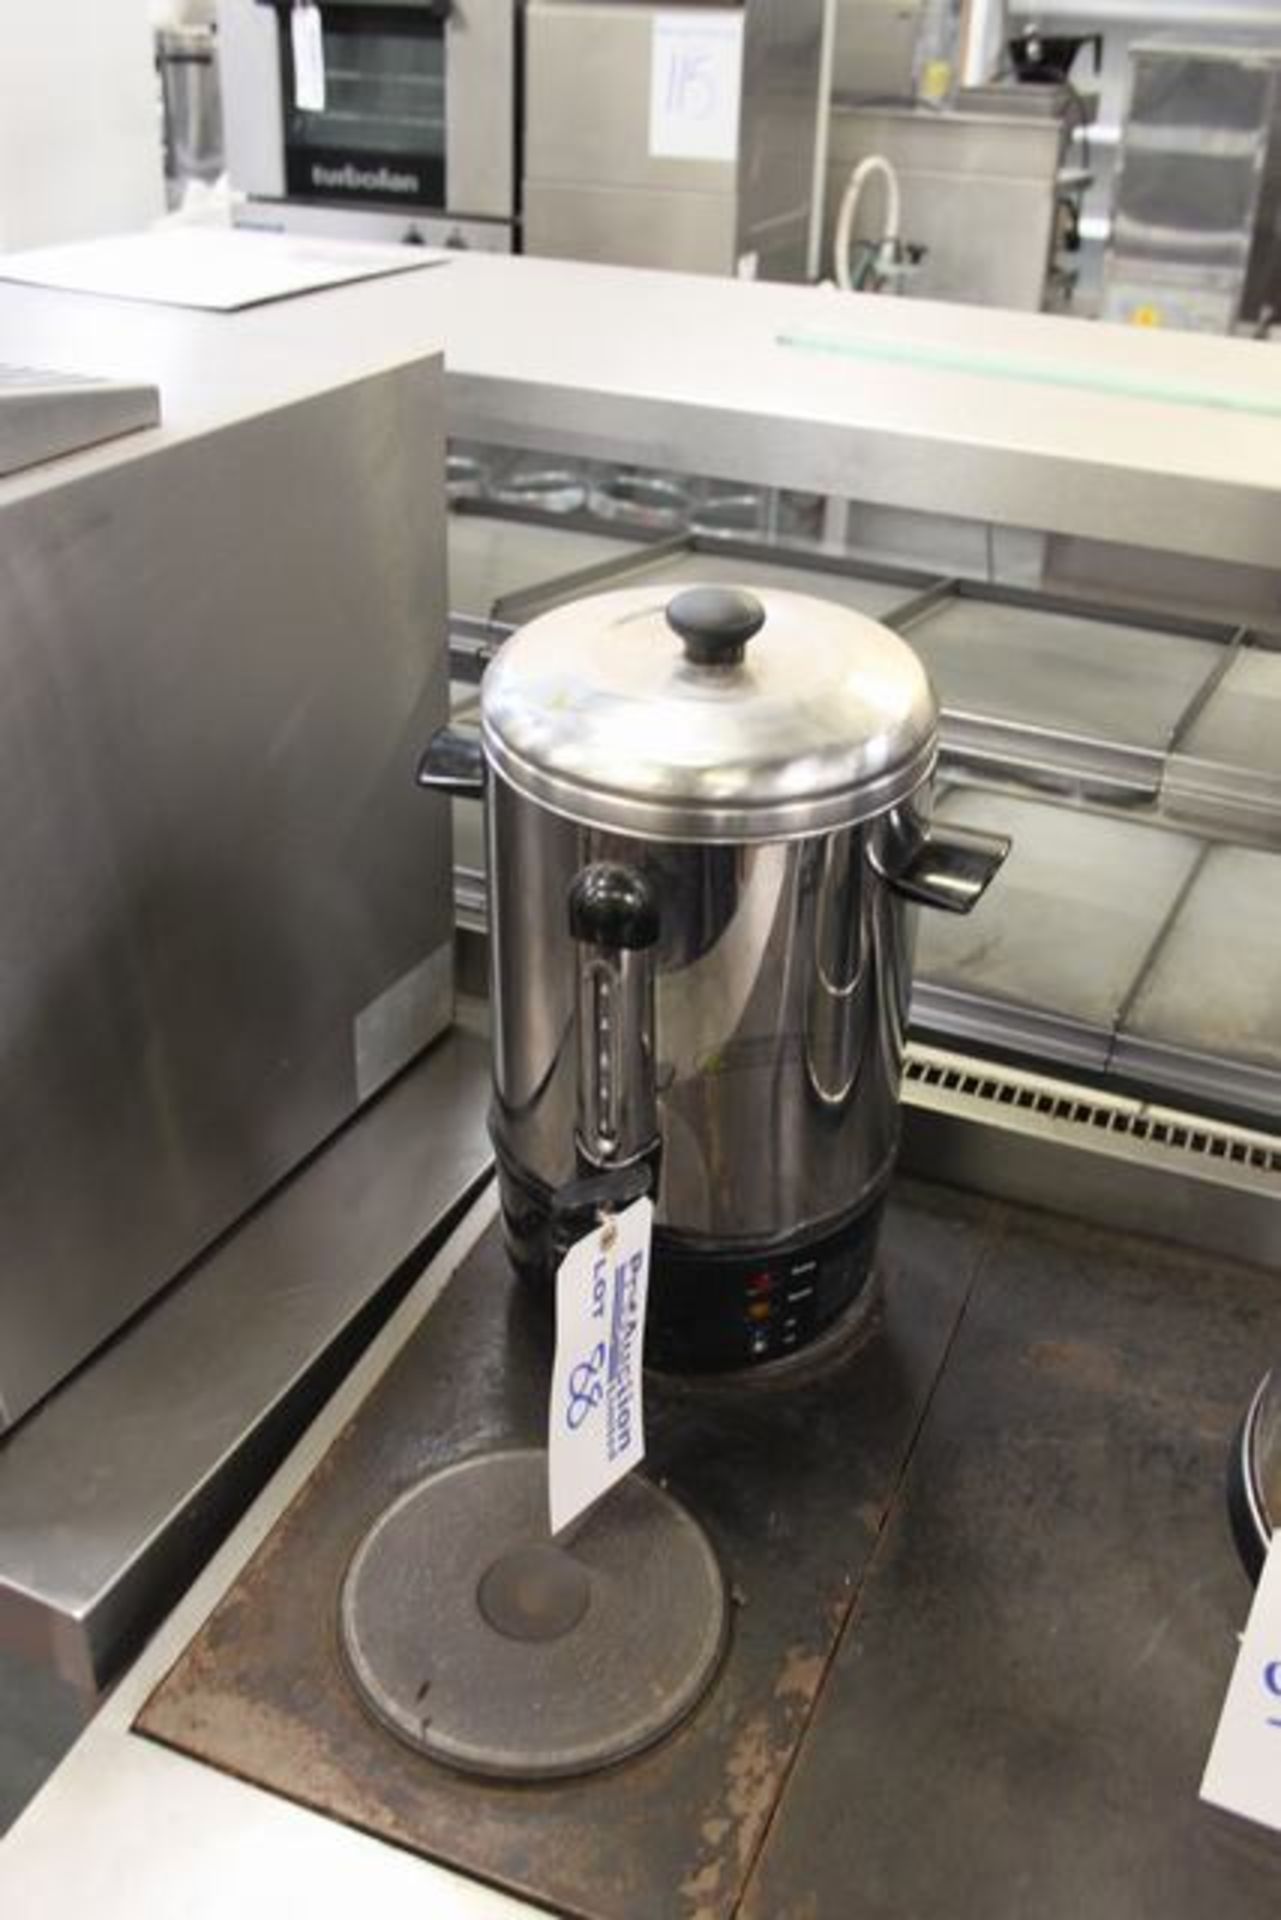 Delta WU2012 10L hot water urn 10.0L capacity and takes around 38 minutes to make. 257mm x 532mm